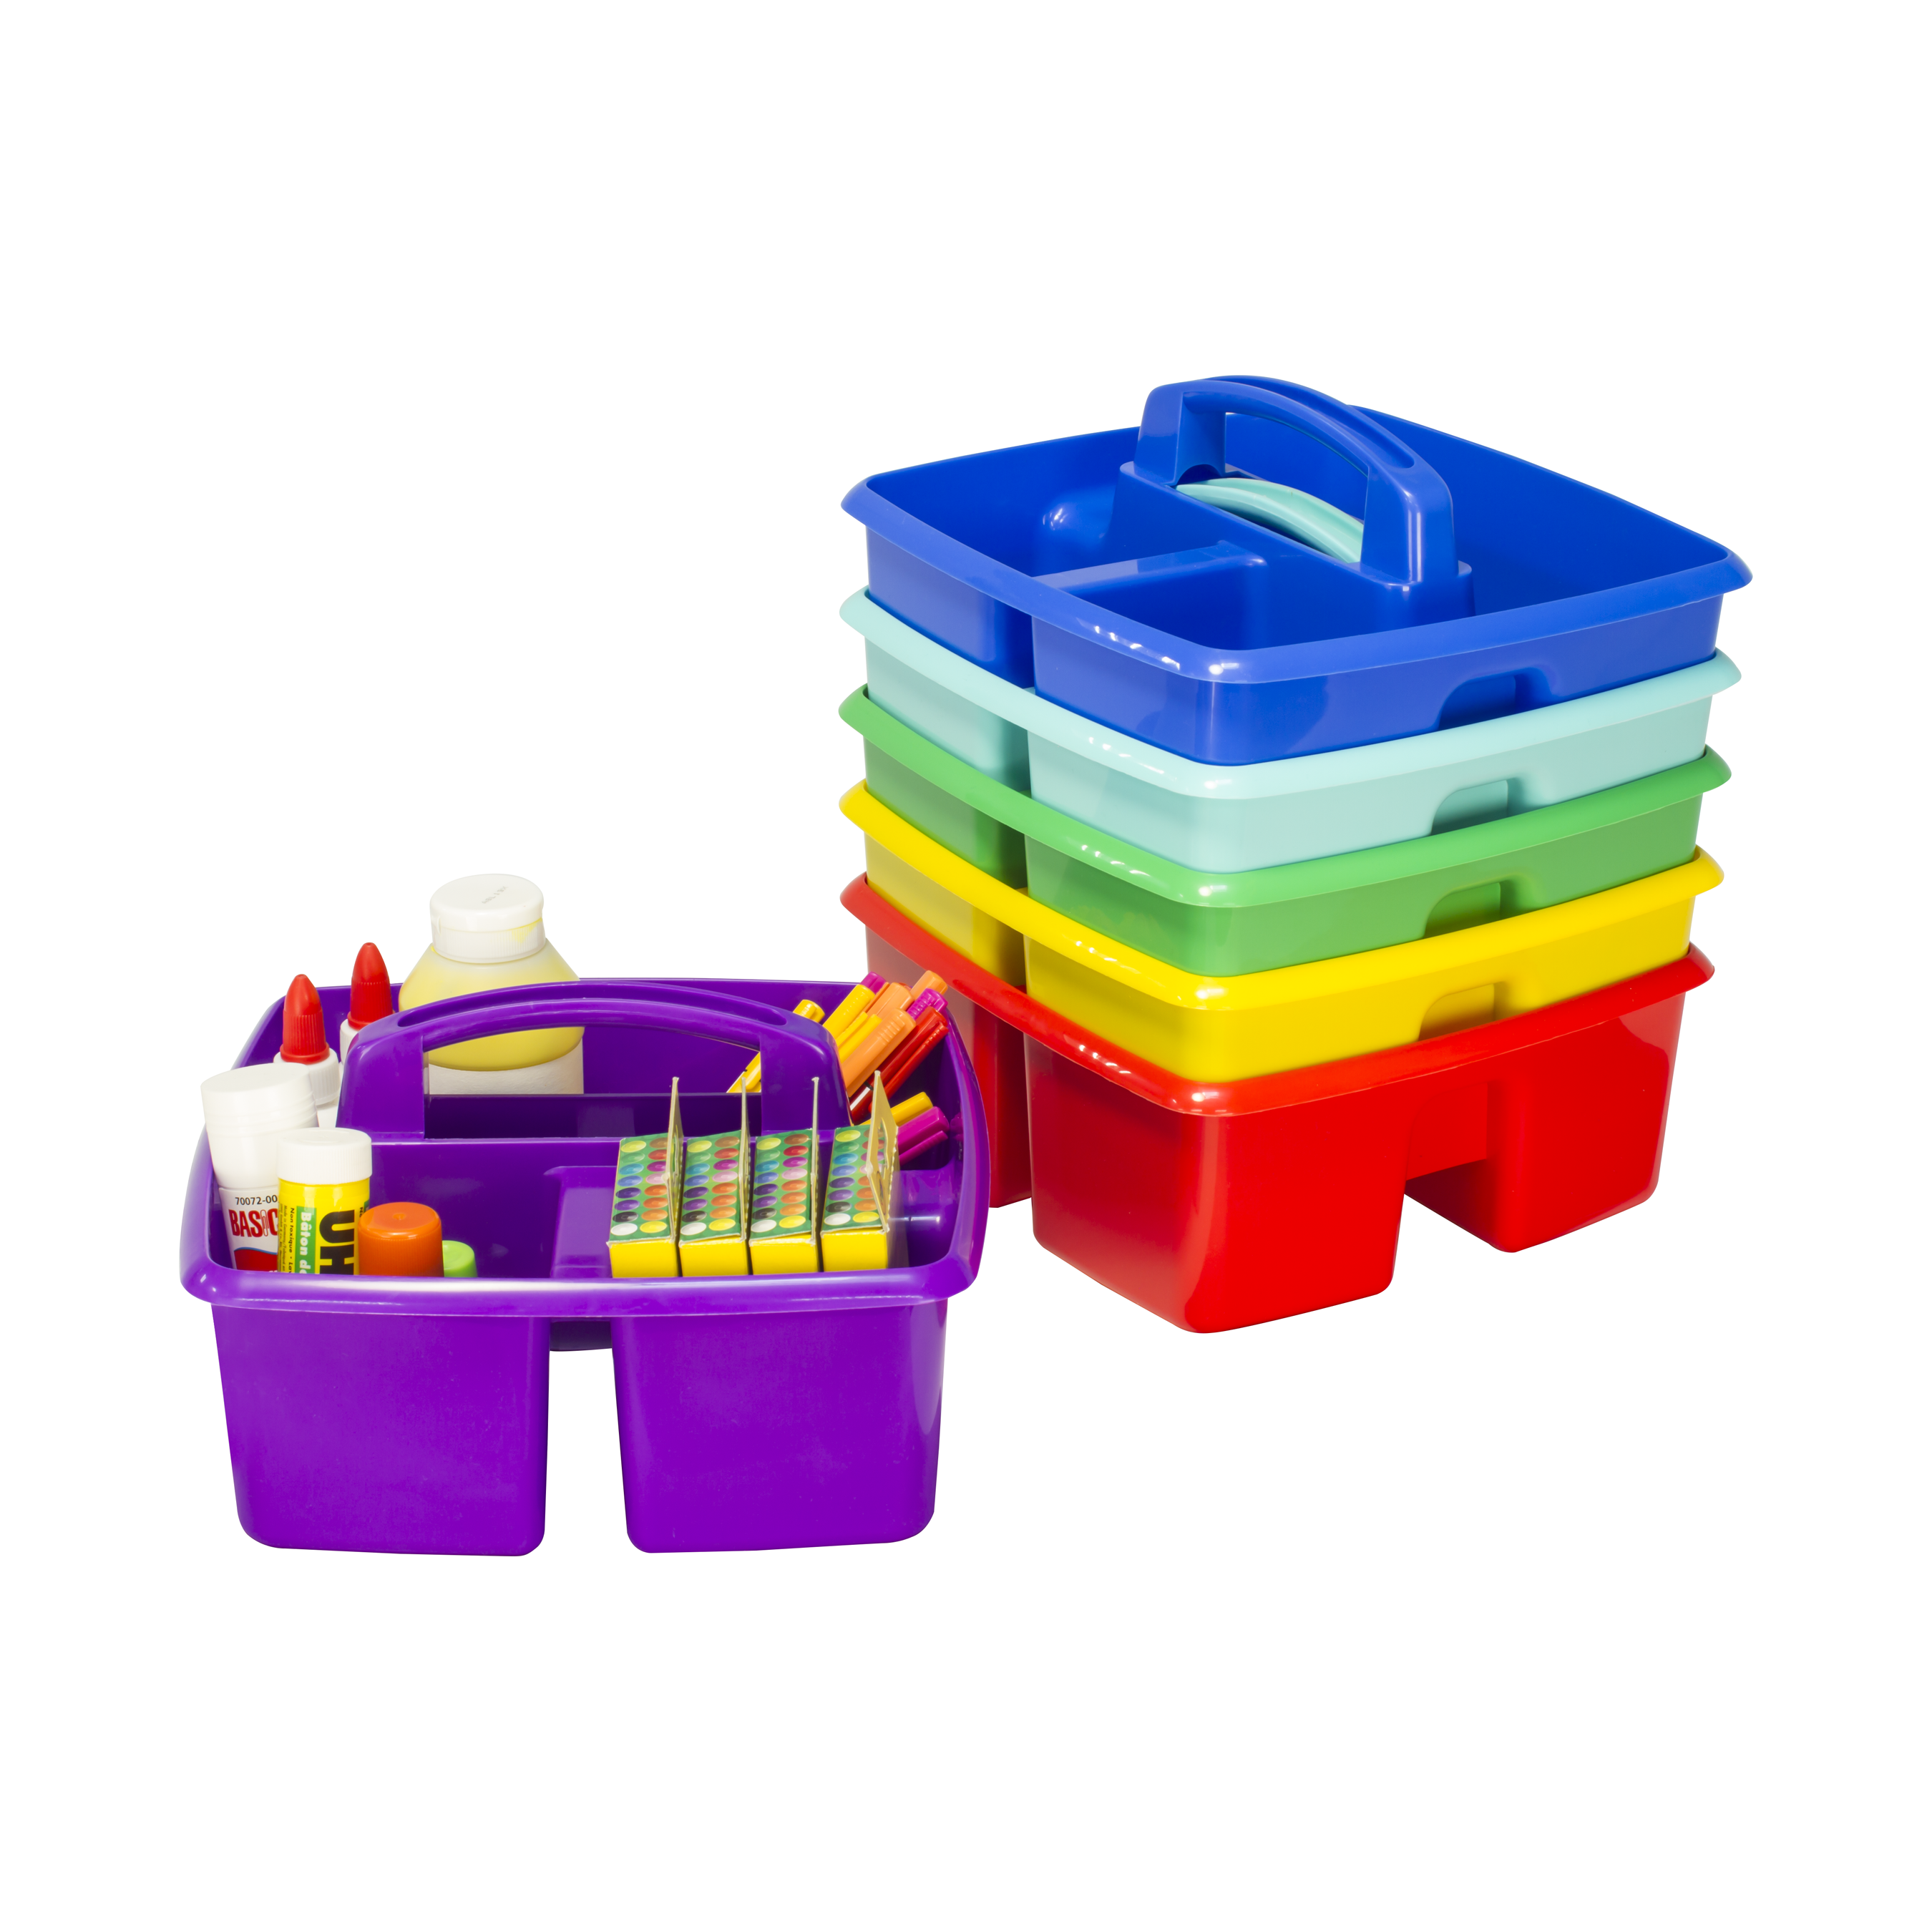 EAI Education Classroom Supply Caddies: Assorted Colors - Set of 6